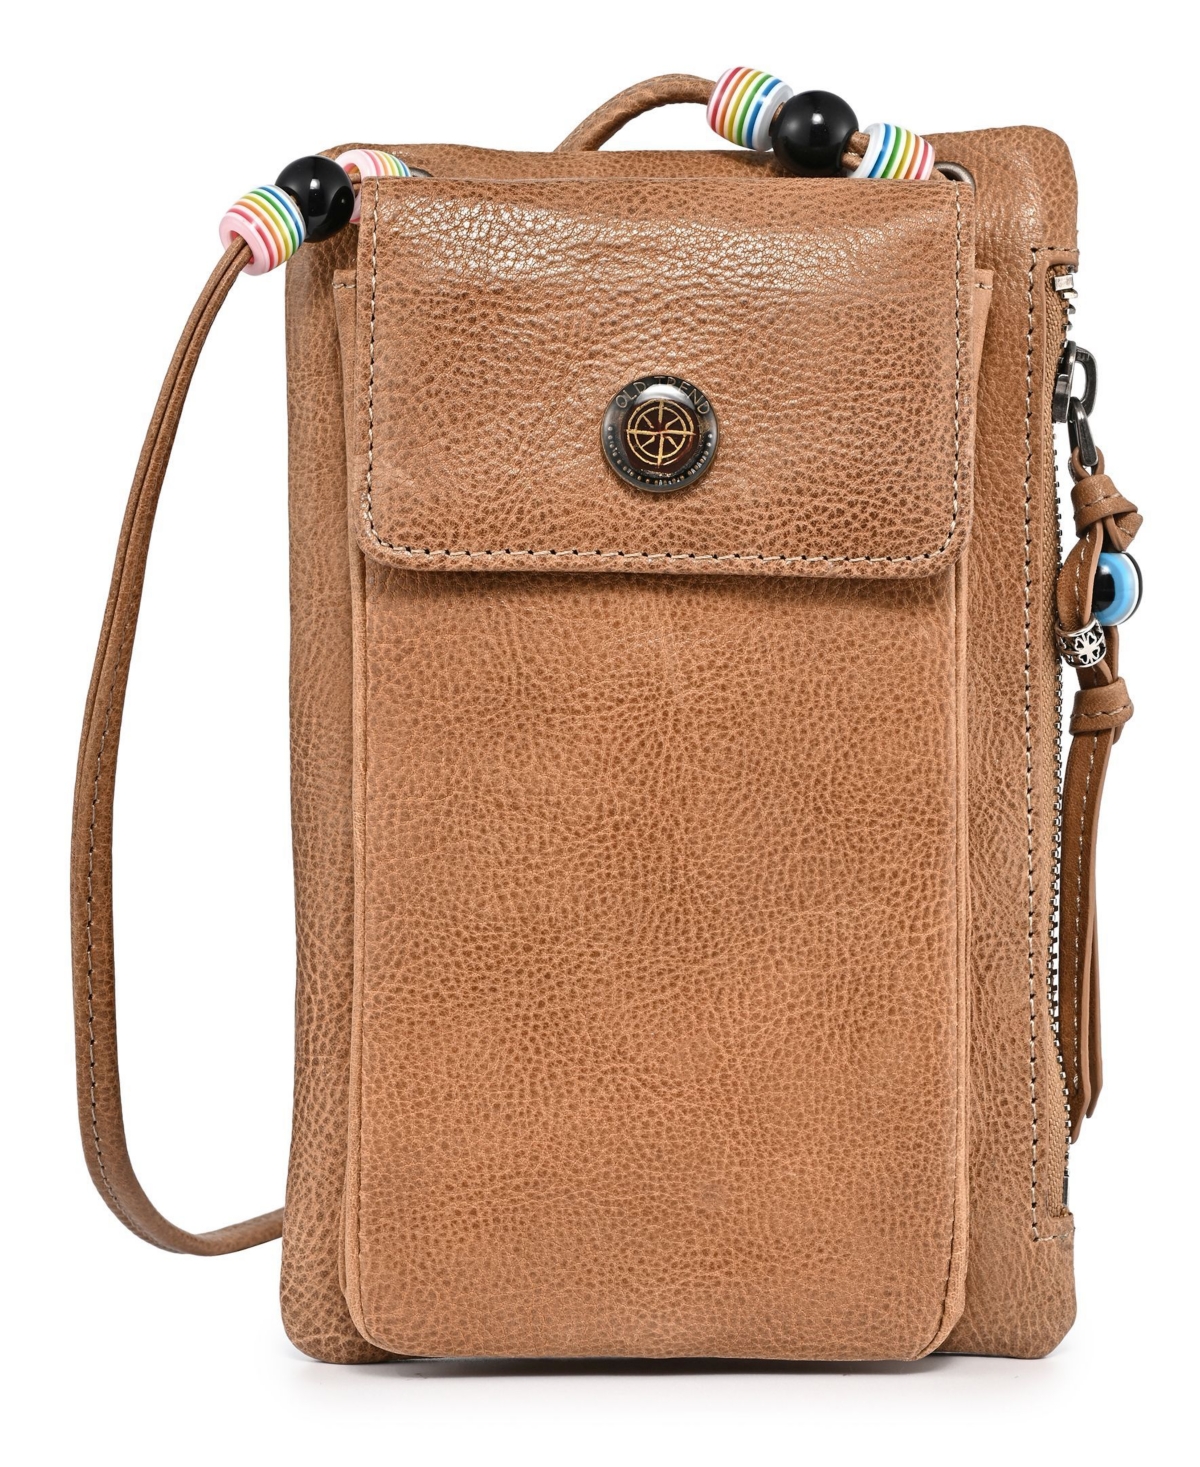 Women's Genuine Leather Northwood Phone Carrier - Tan